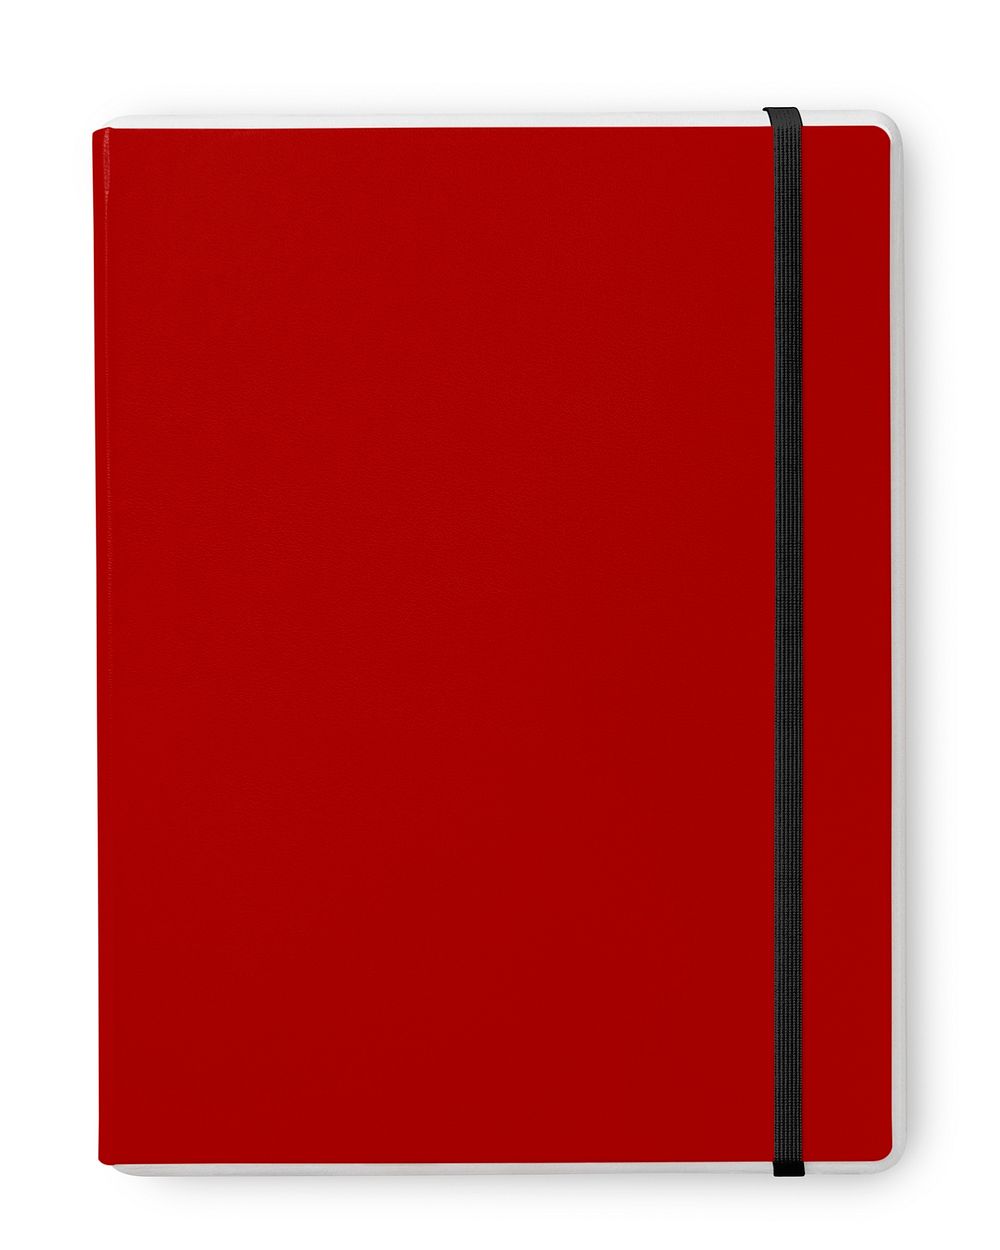 Notebook with red cover